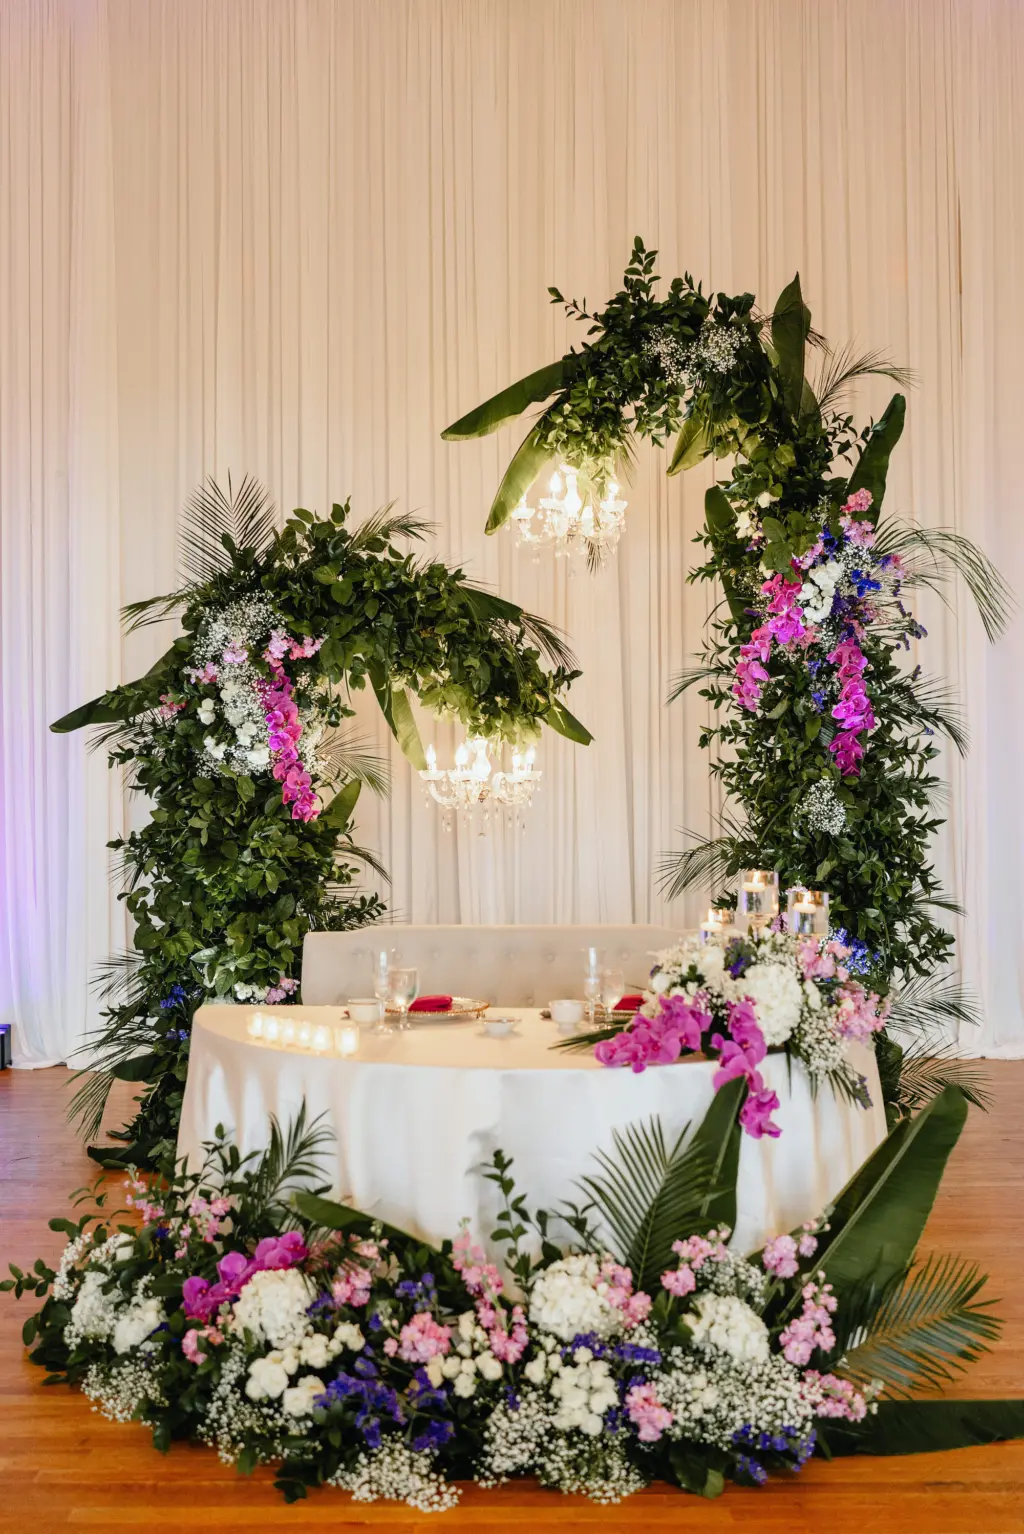 Asian Fusion Floral Sweetheart Table with Unique Wedding Arch of Tropical Leaves and Greenery and Purple Florals Wedding Reception Inspiration